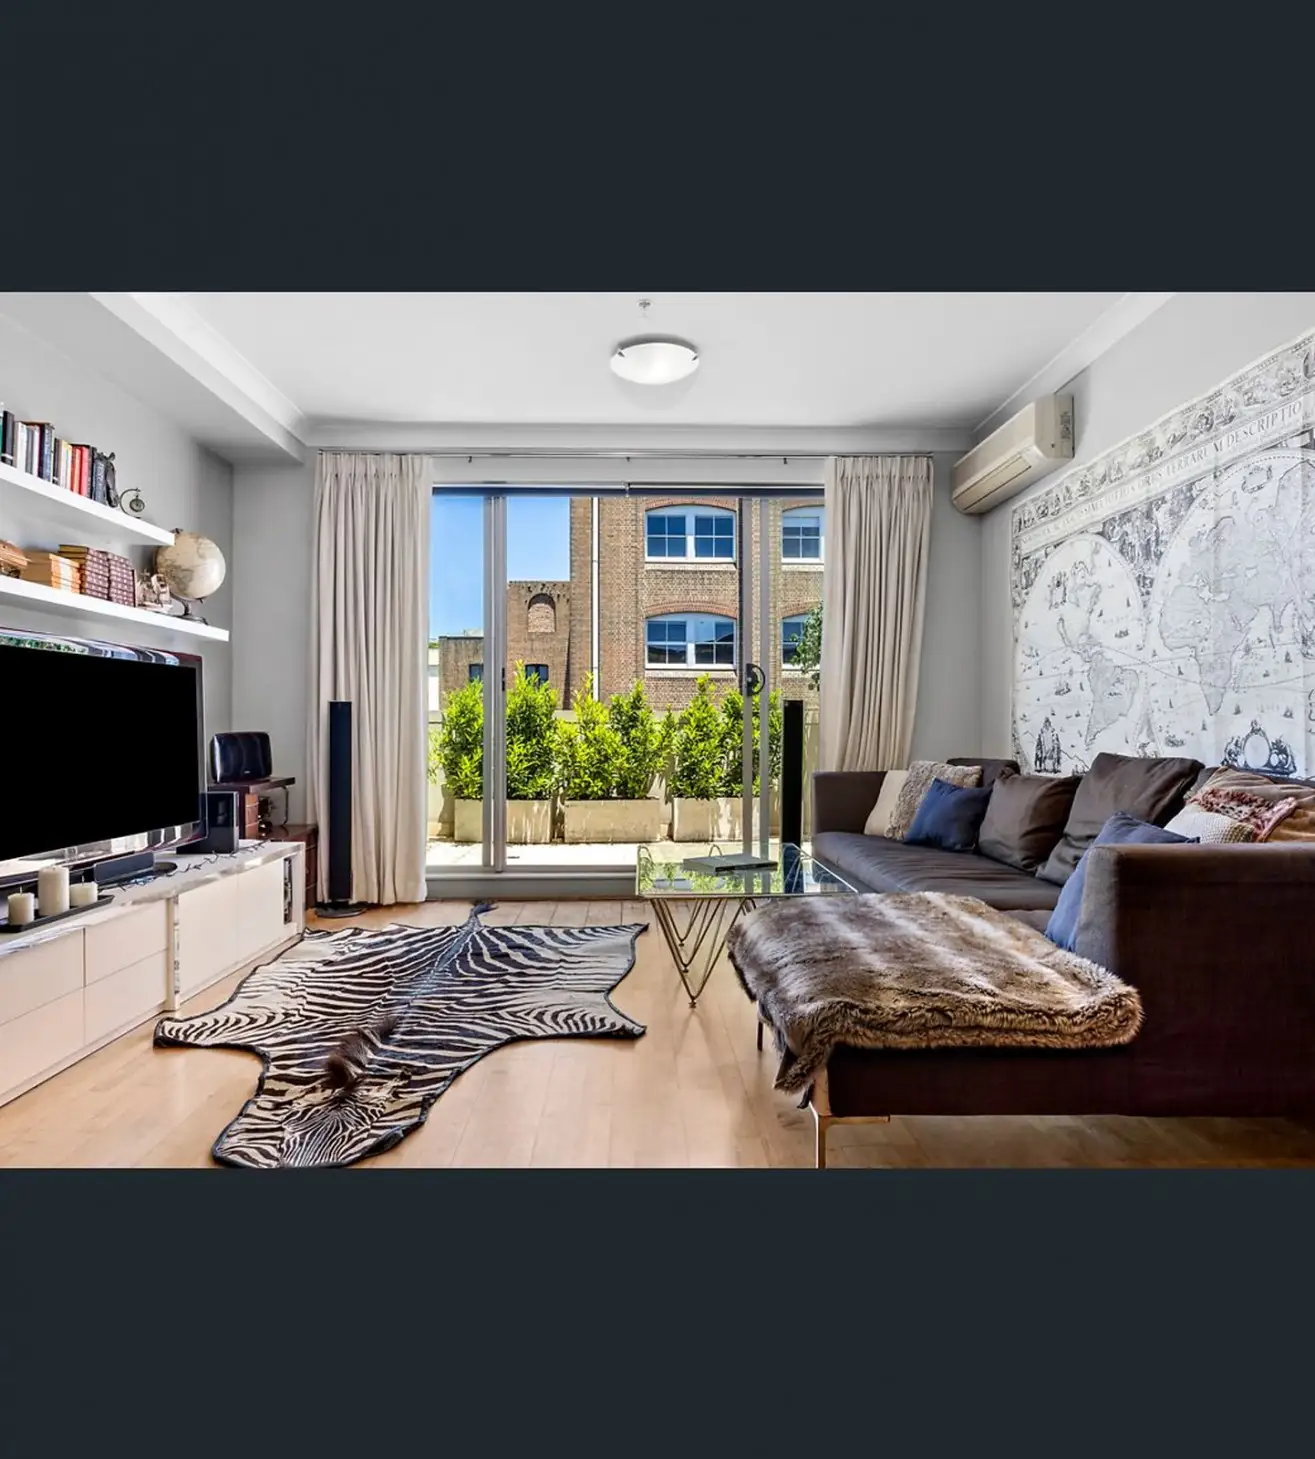 Photo #1: 506/2-12 Smail Street, Ultimo - Sold by Sydney Sotheby's International Realty